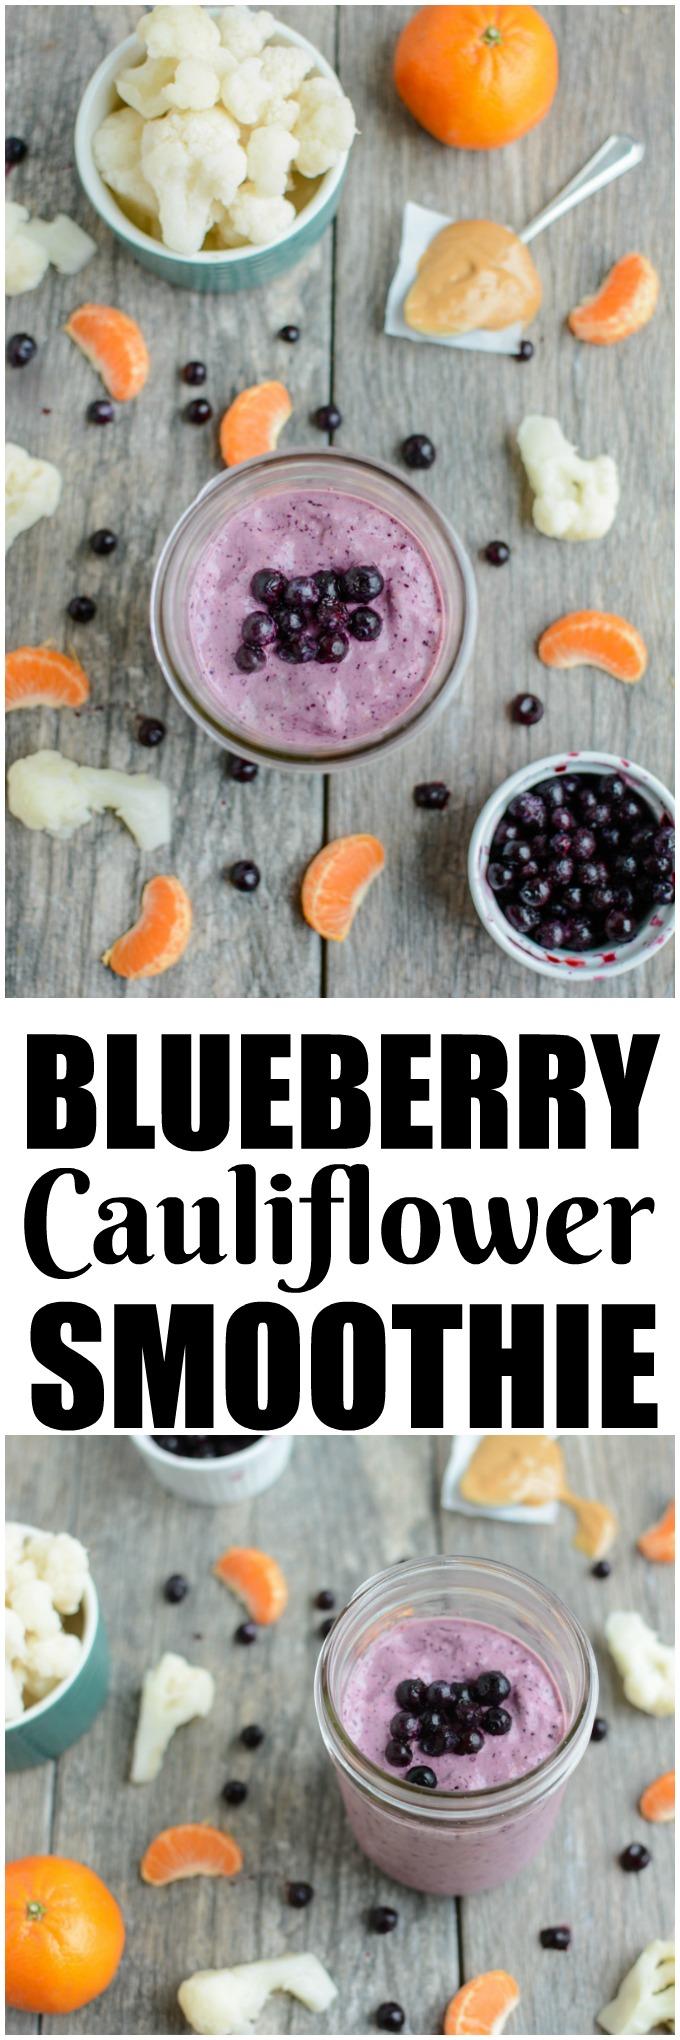 This Blueberry Cauliflower Smoothie is packed with vegetables, protein and healthy fats. Easy and kid-friendly, it's perfect for a healthy breakfast or snack!